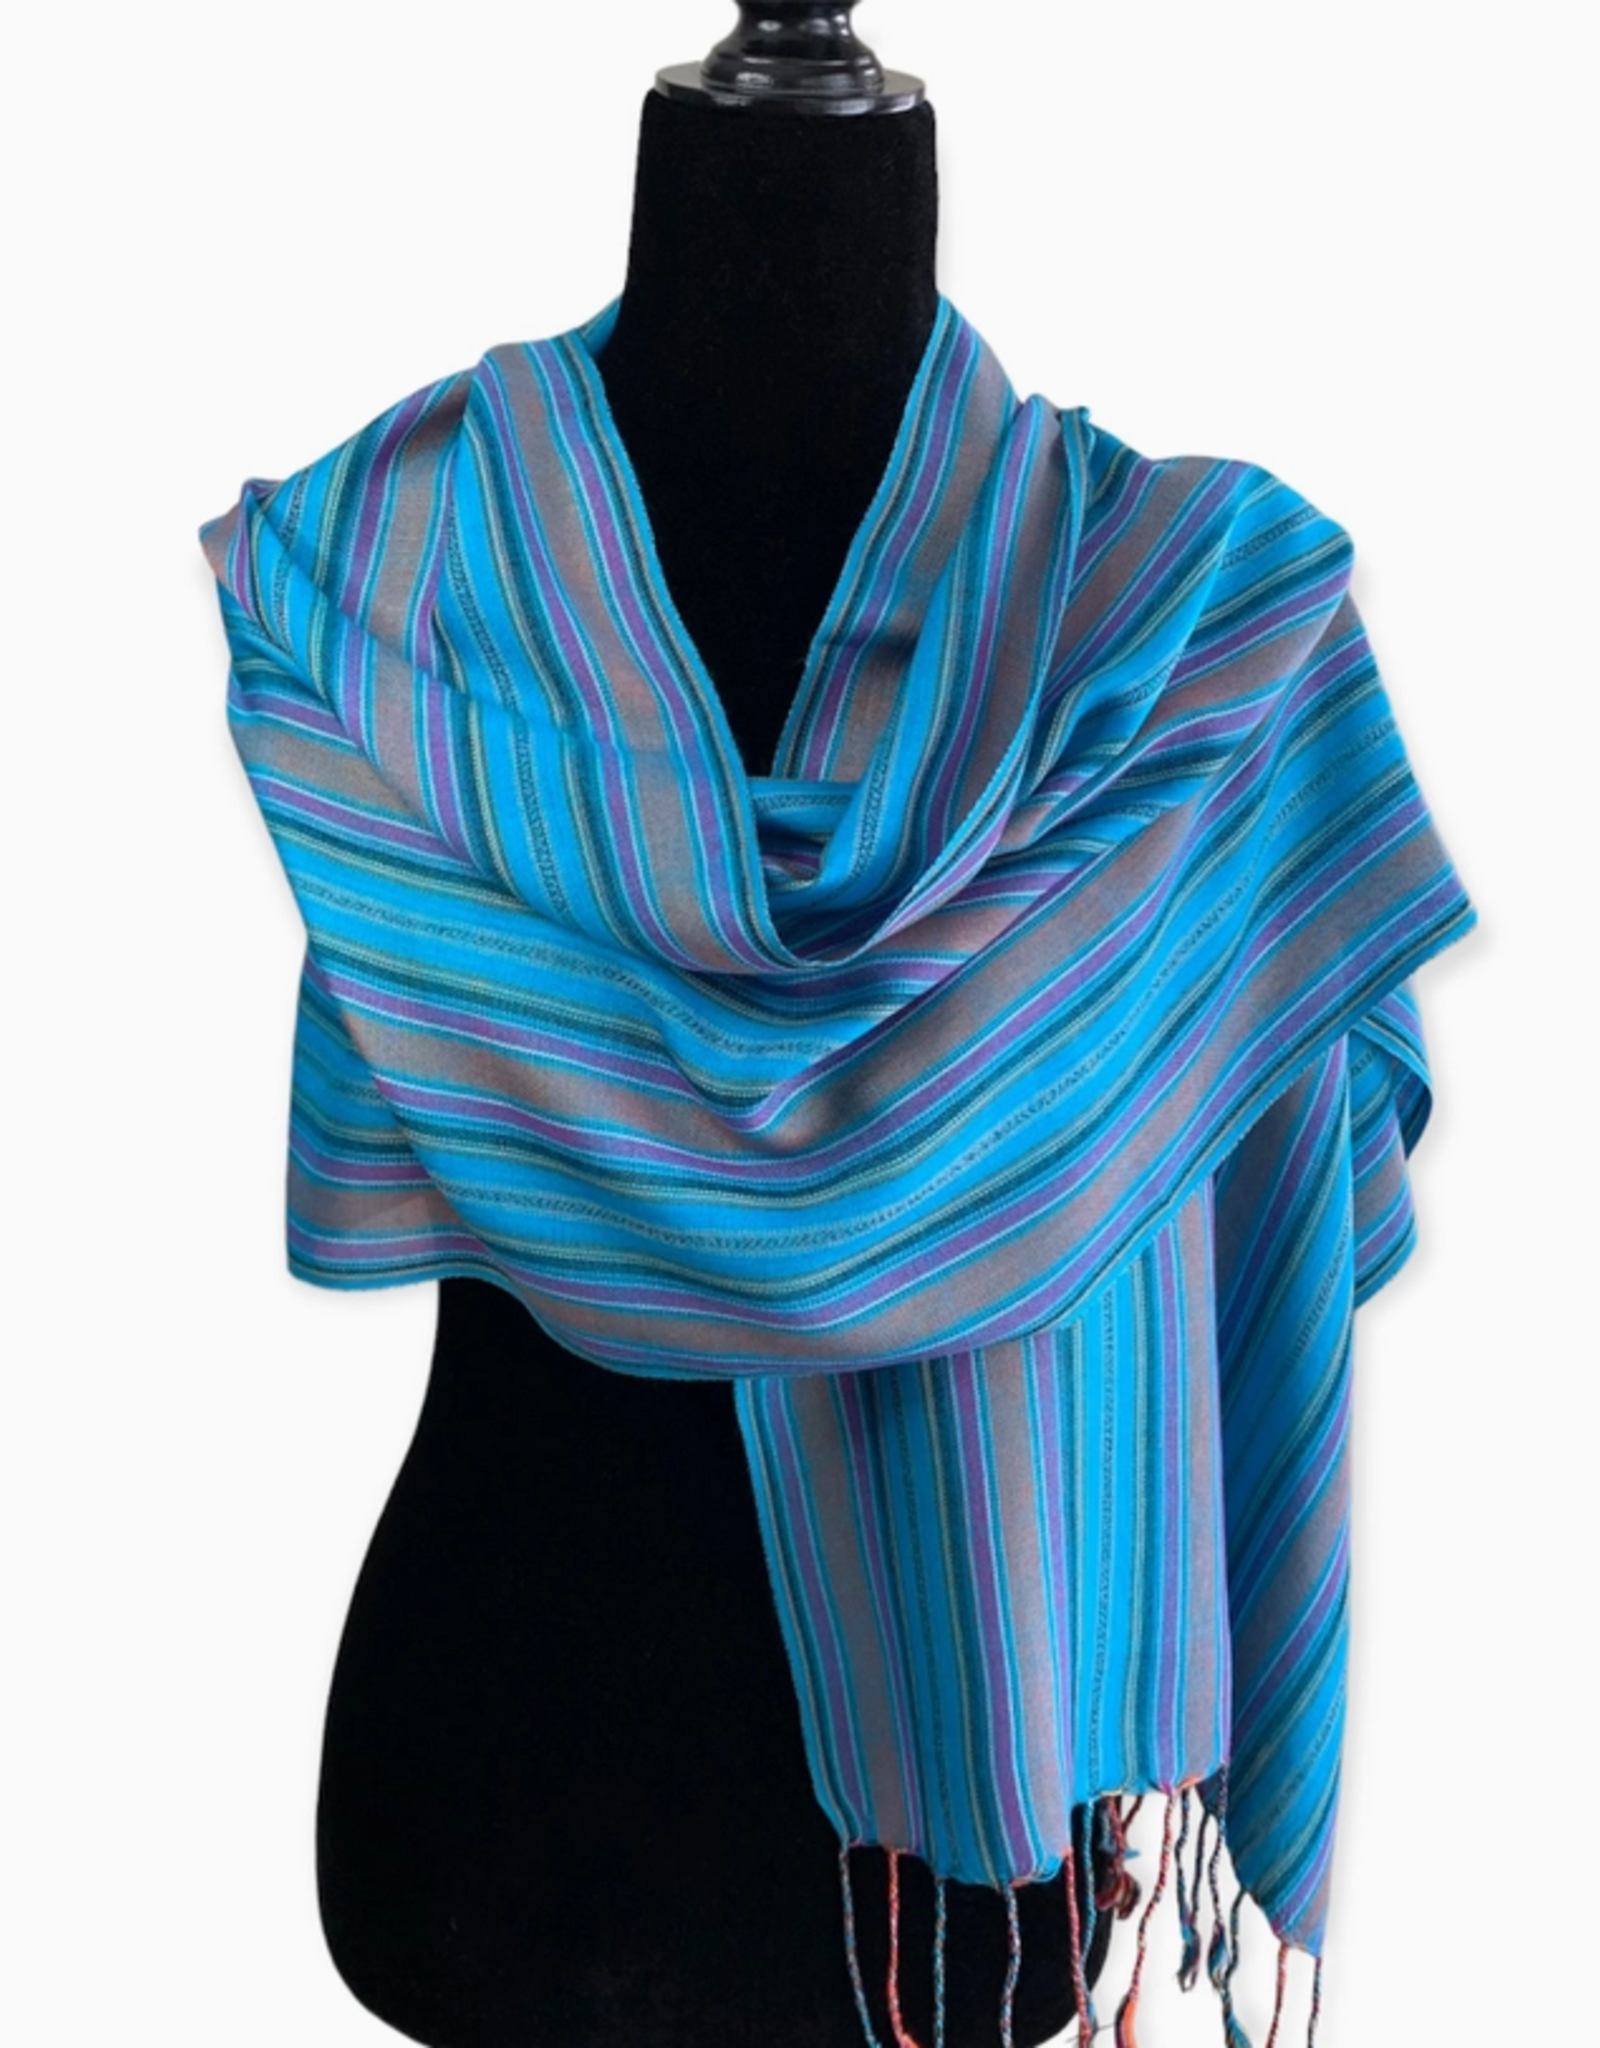 Dandarah Small Mixed Striped Handwoven Bamboo Viscose Scarf - Turquoise